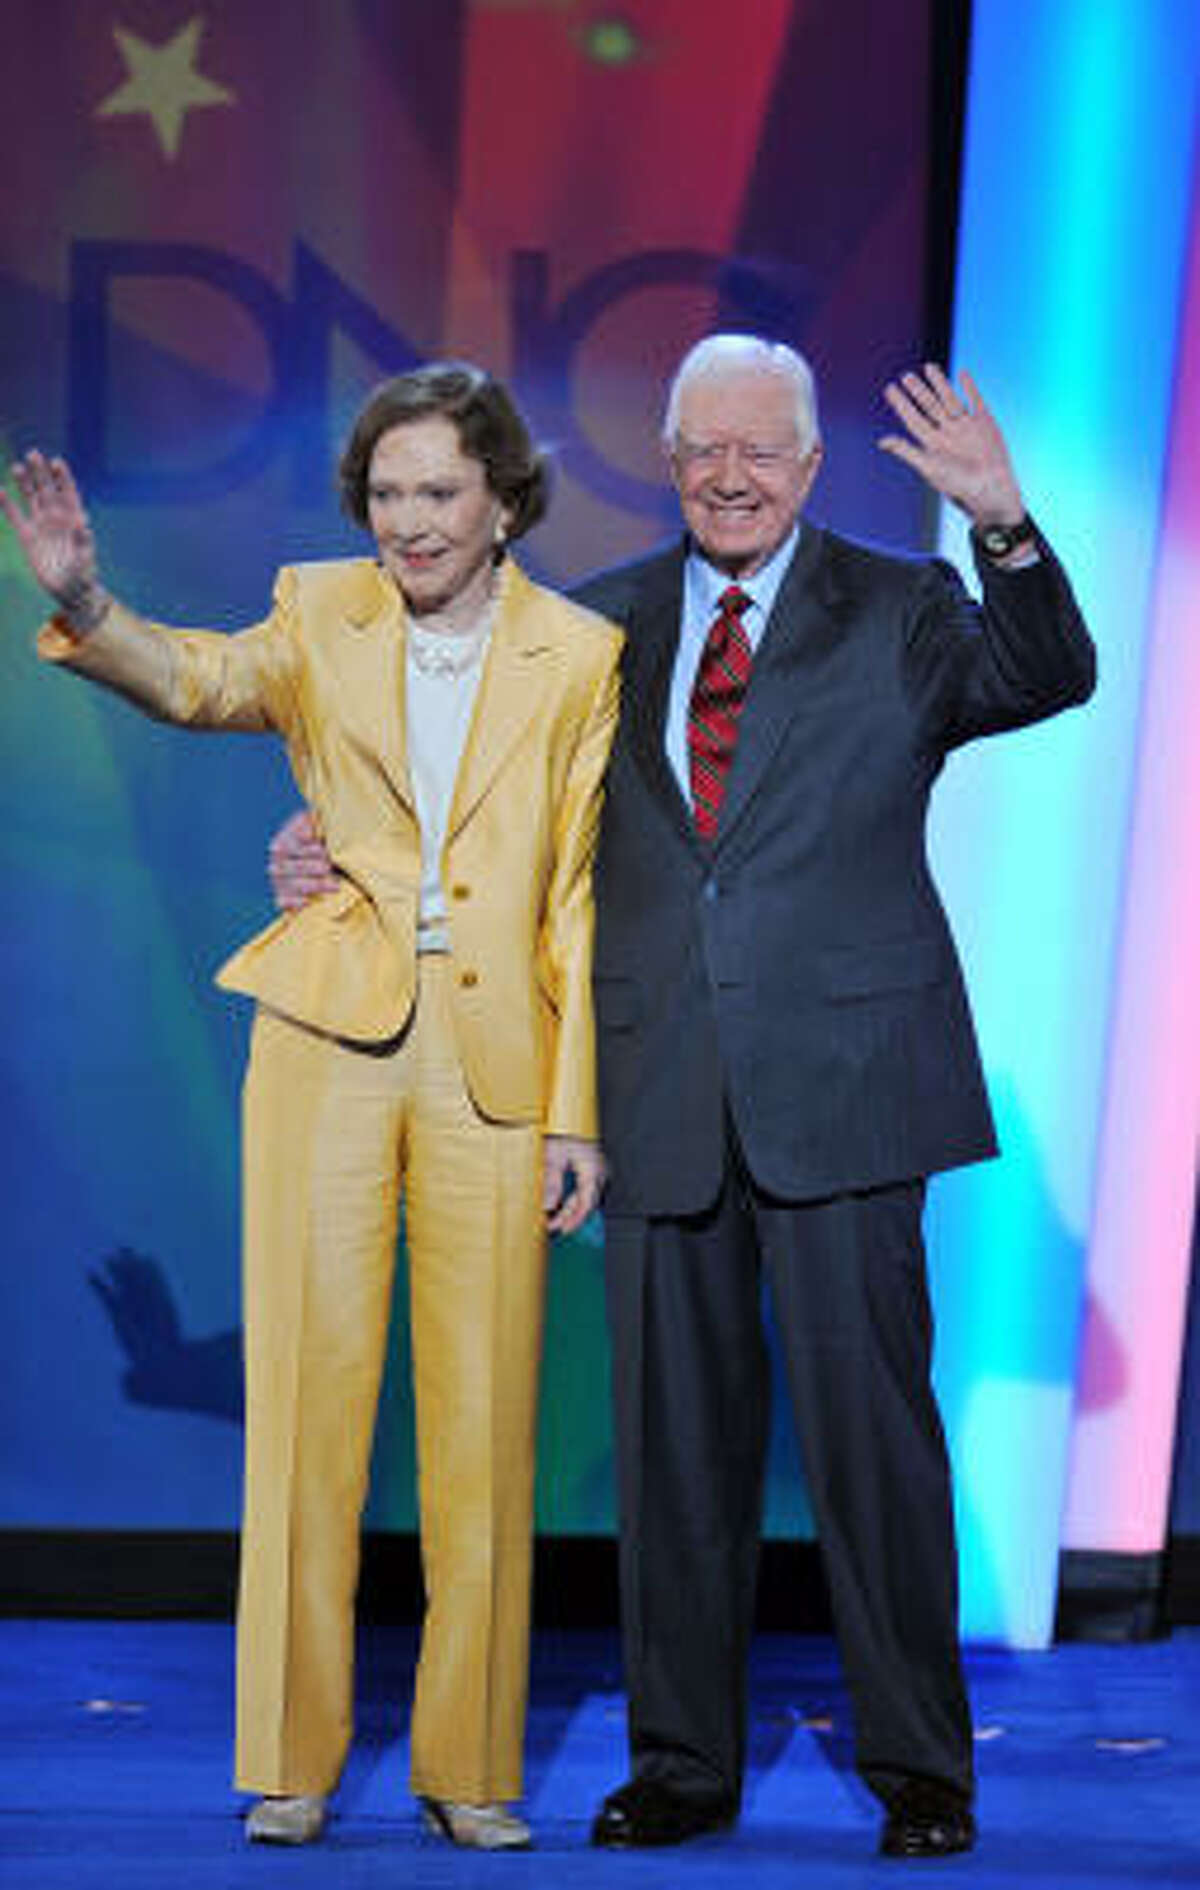 Former US president Jimmy Carter and his wife, Rosalynn, wave to supporters at the convention.